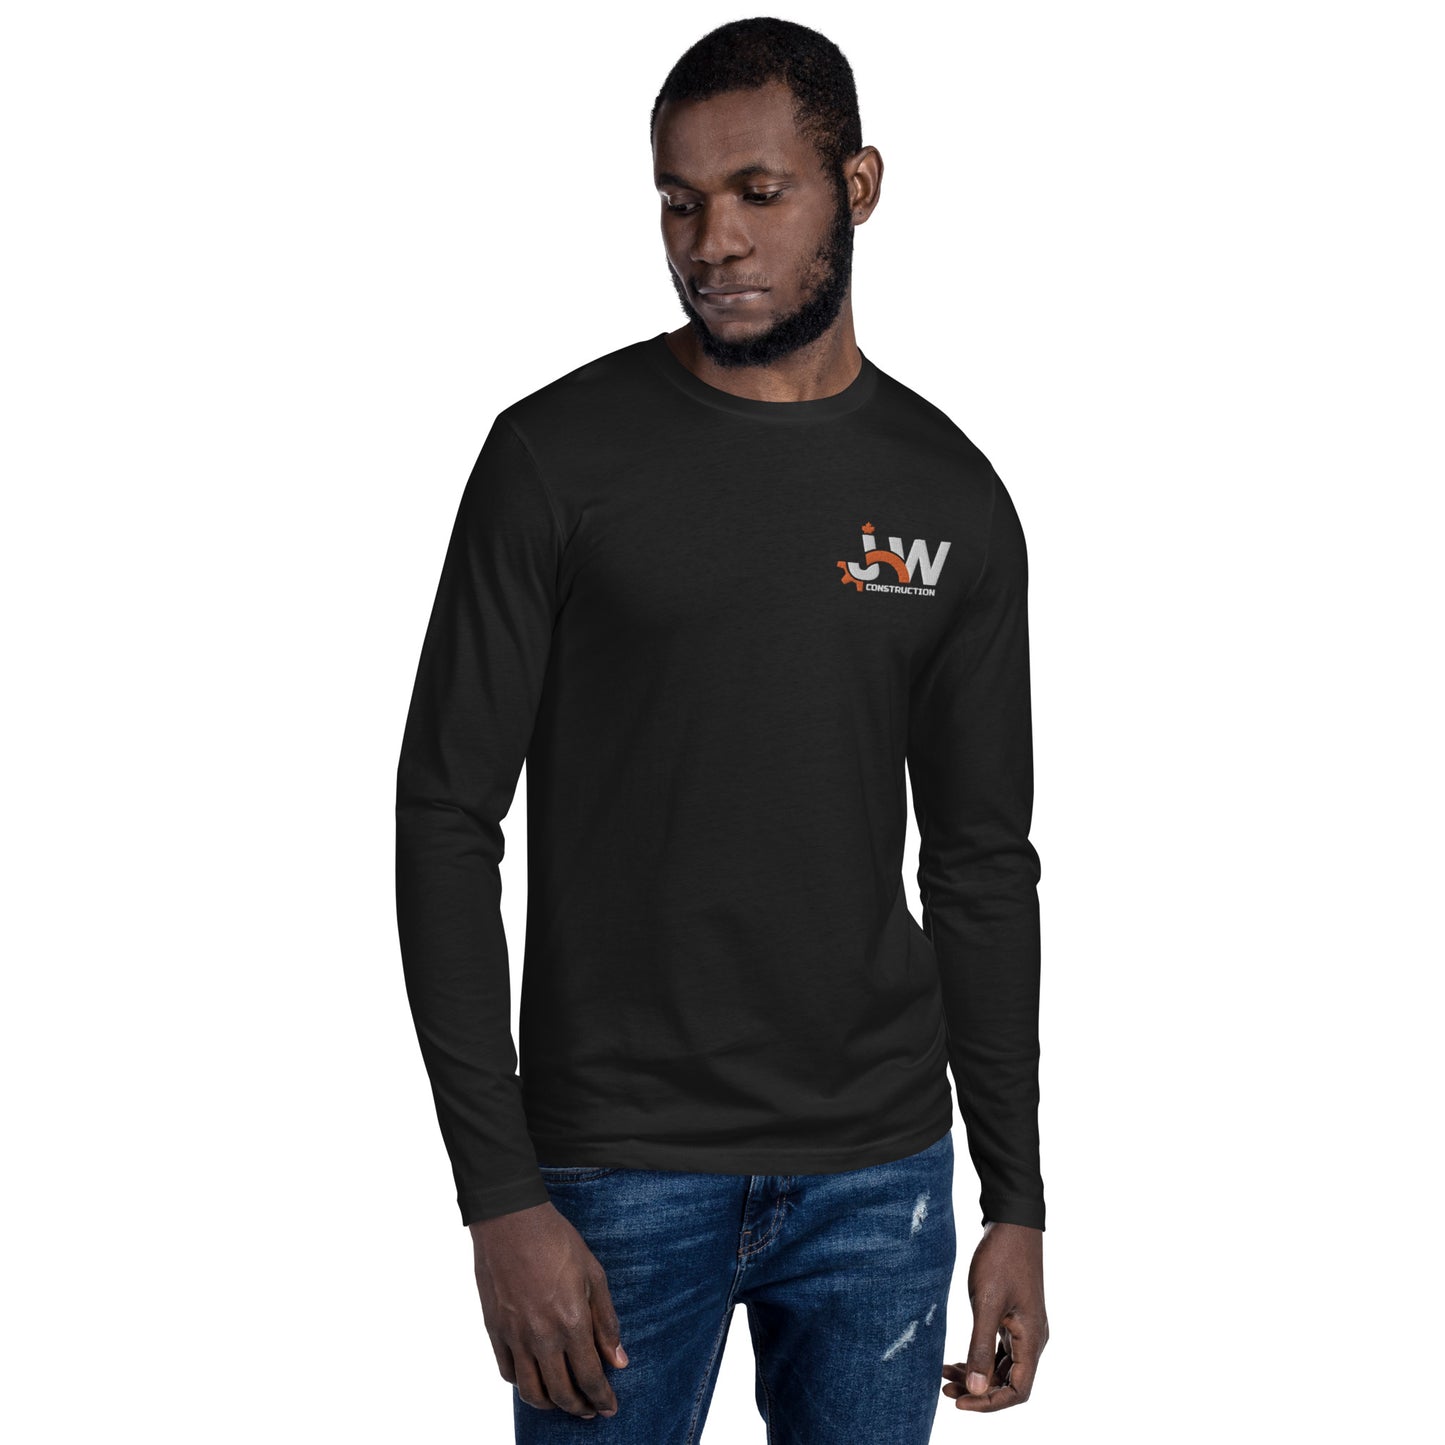 JHW Long Sleeve Embroidery T-shirt